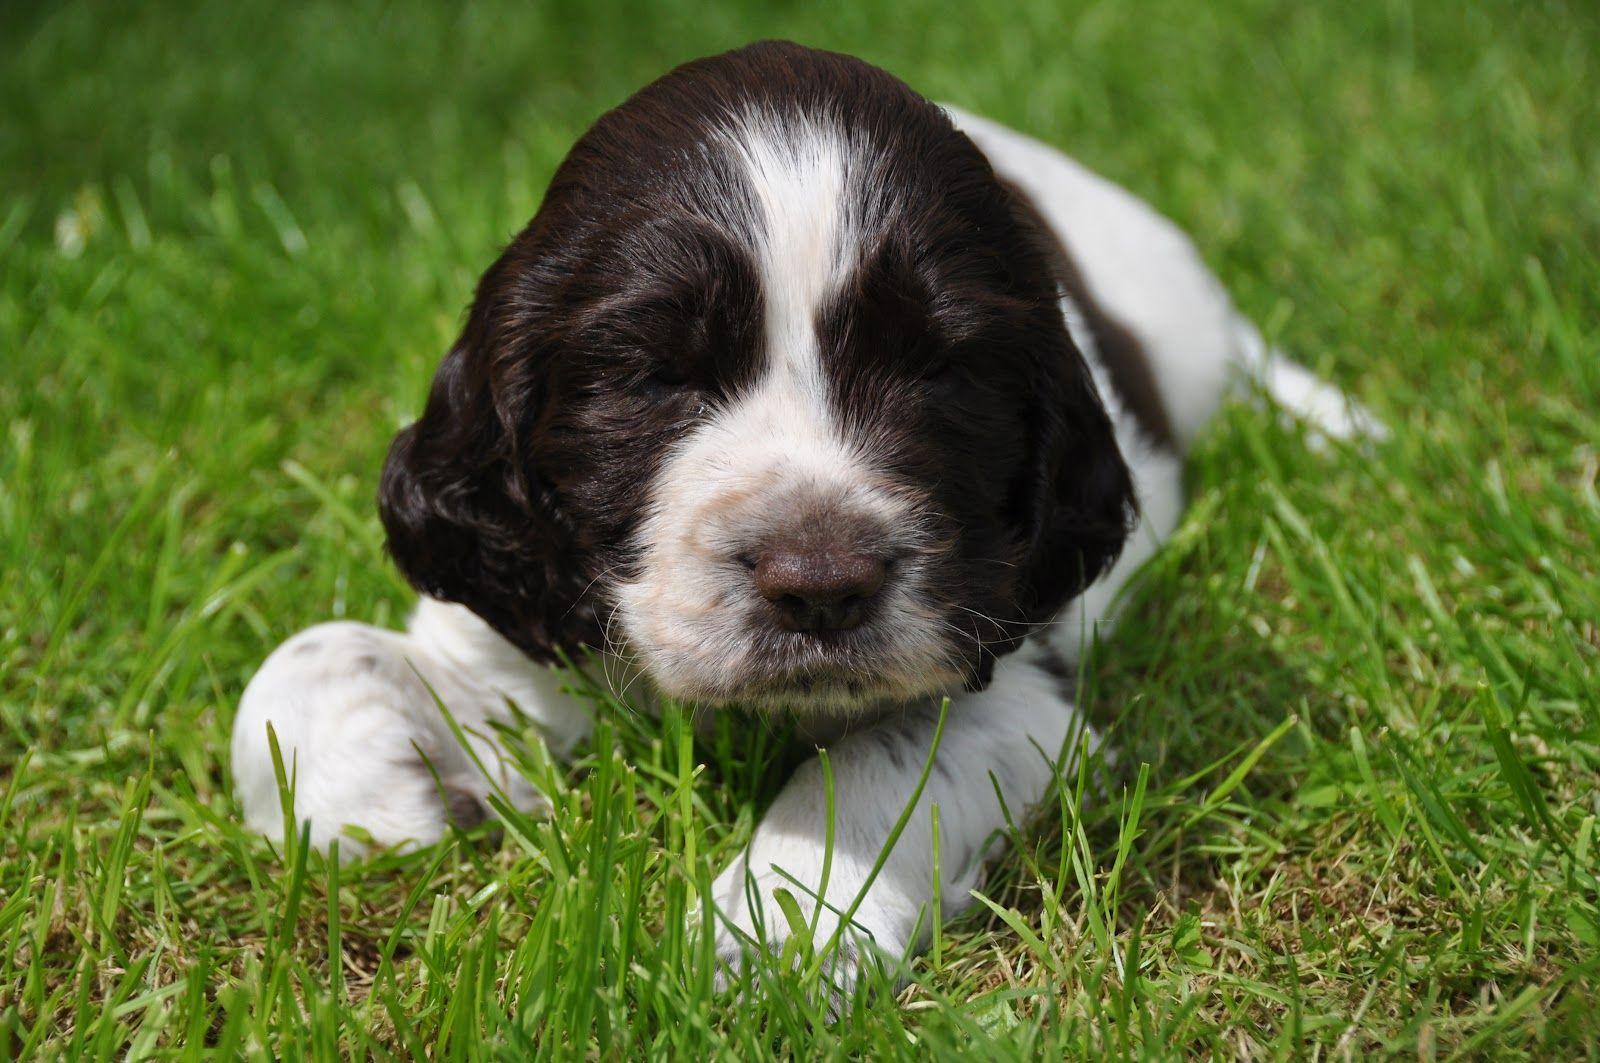 English Springer Spaniel puppy on the grass photo and wallpaper